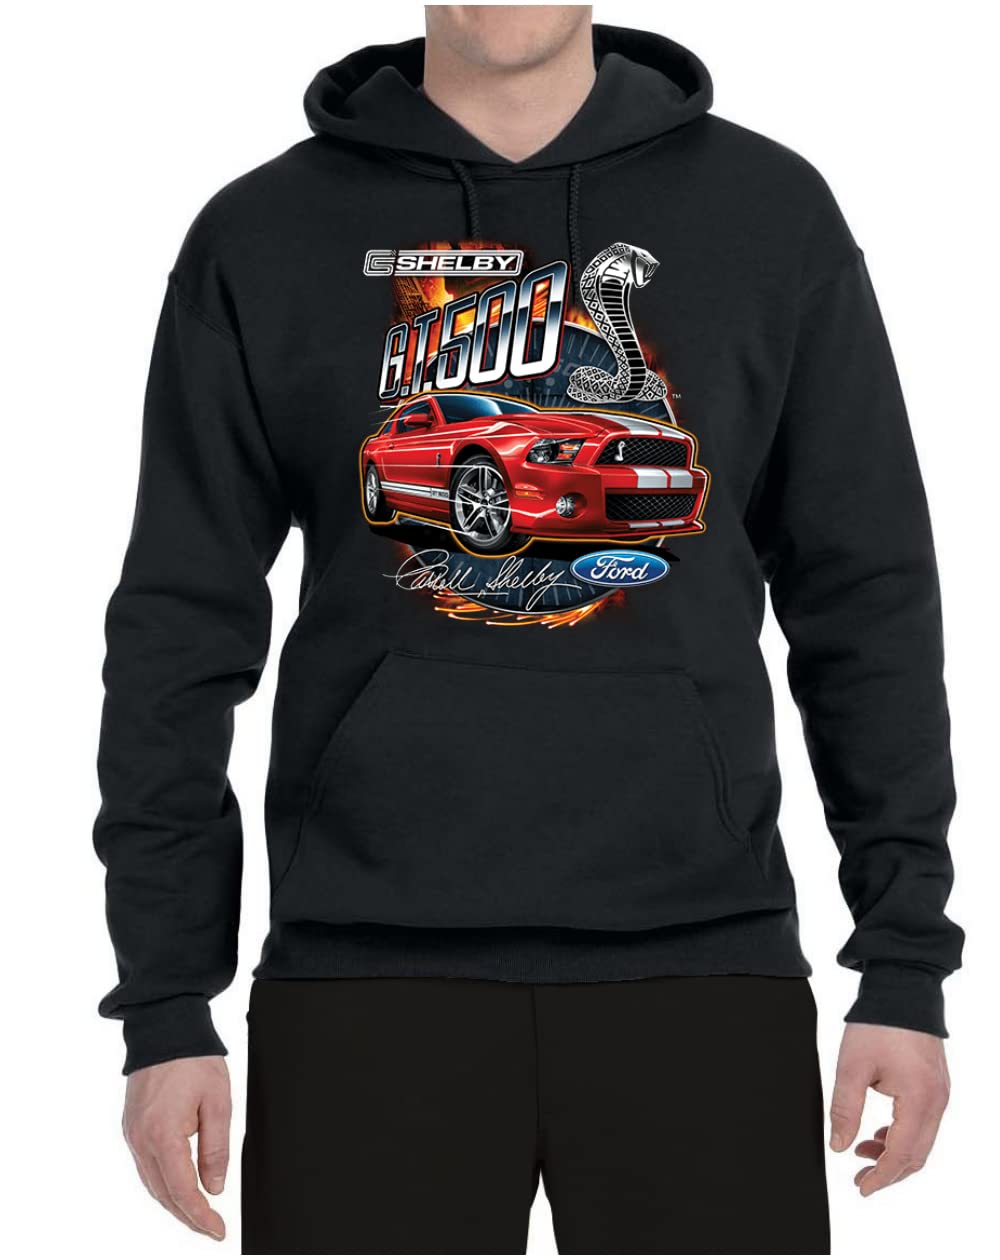 Wild Bobby Shelby GT500 Cobra Official Ford Motors Design Cars and Trucks Unisex Graphic Hoodie Sweatshirt, Black, X-Large